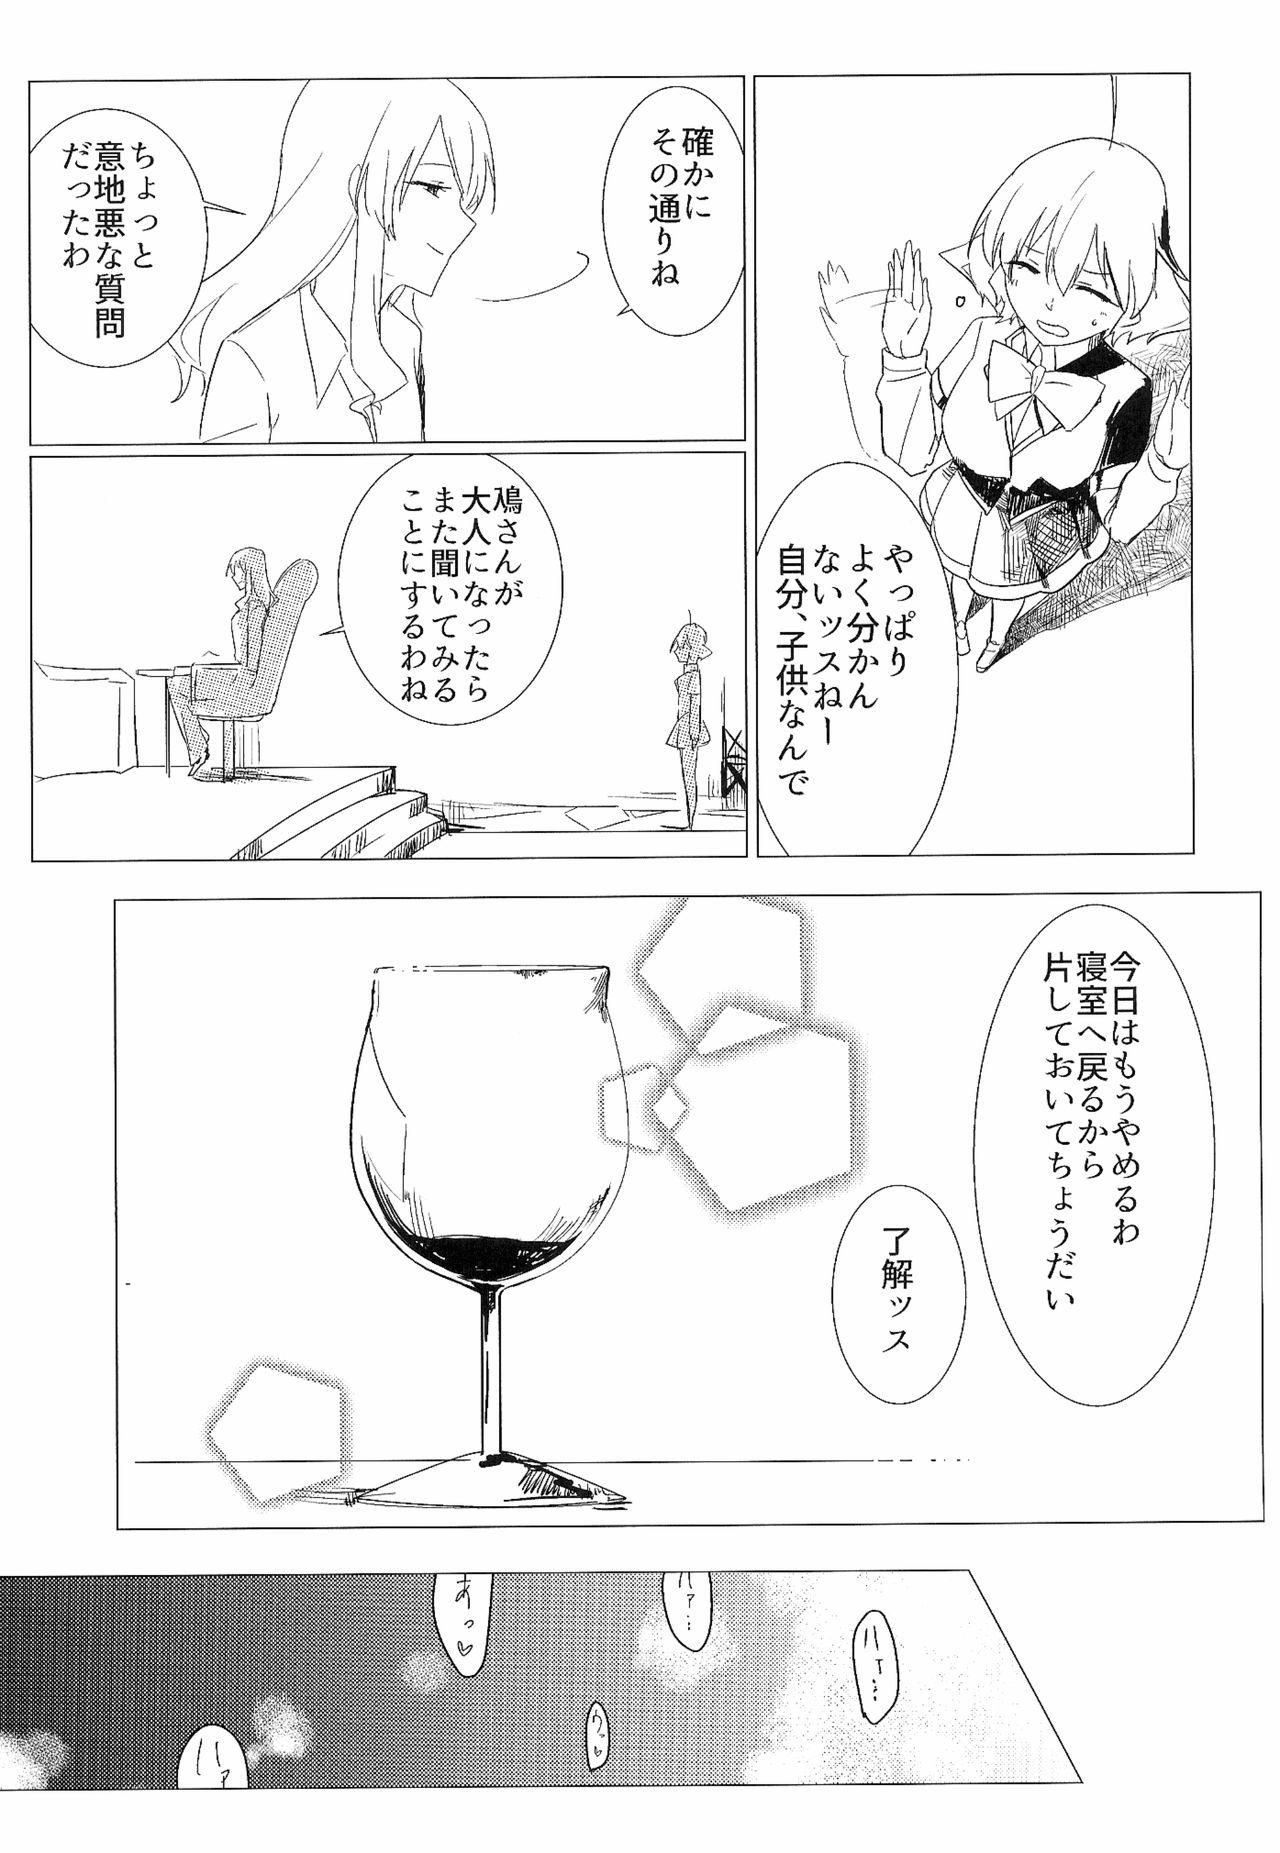 Casting Wine-Red Orgasm - Akuma no riddle Edging - Page 5